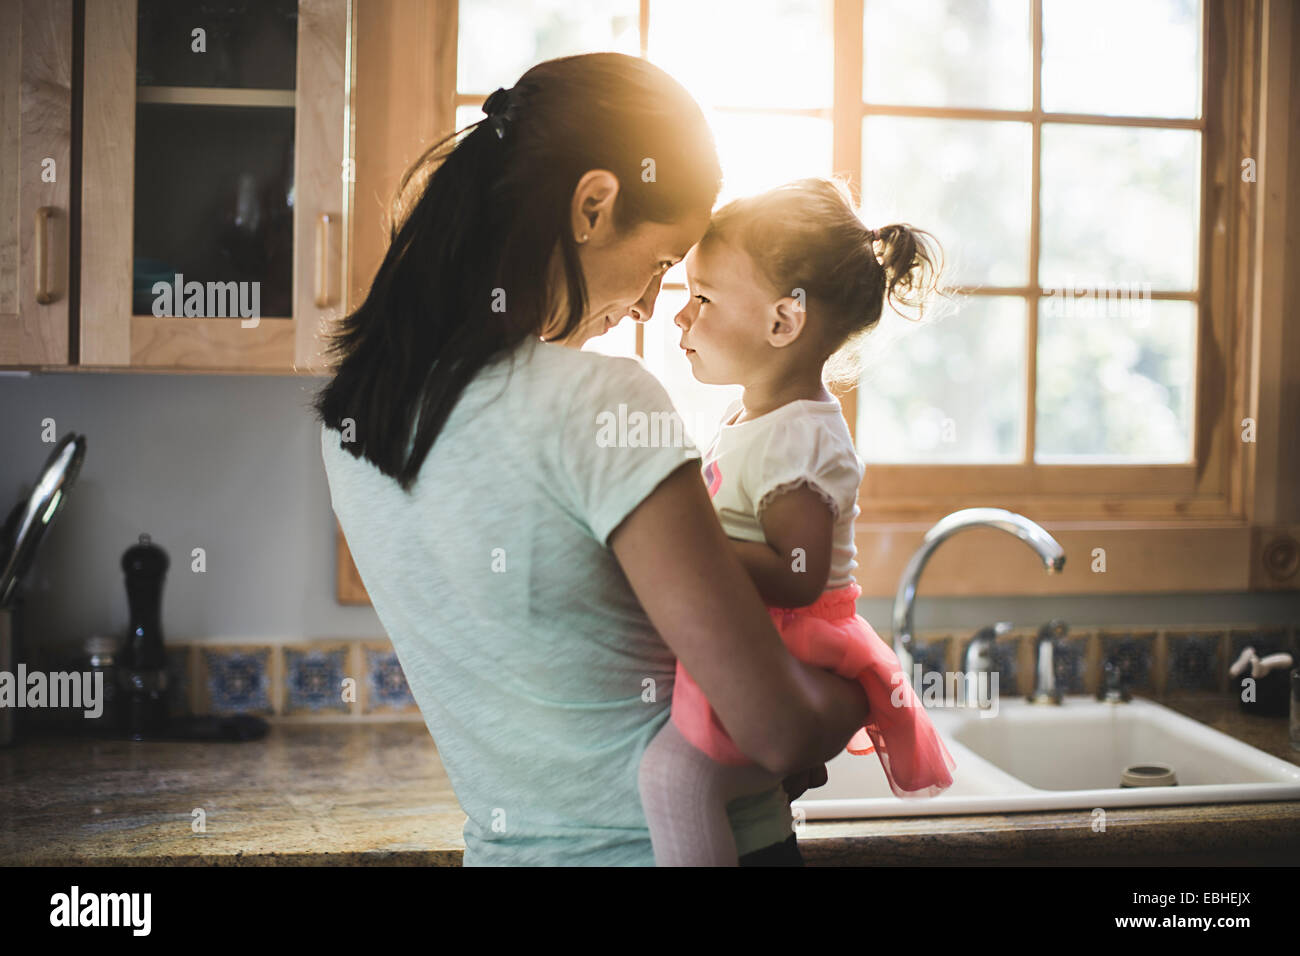 Mother and daughter playing in kitchen Stock Photo